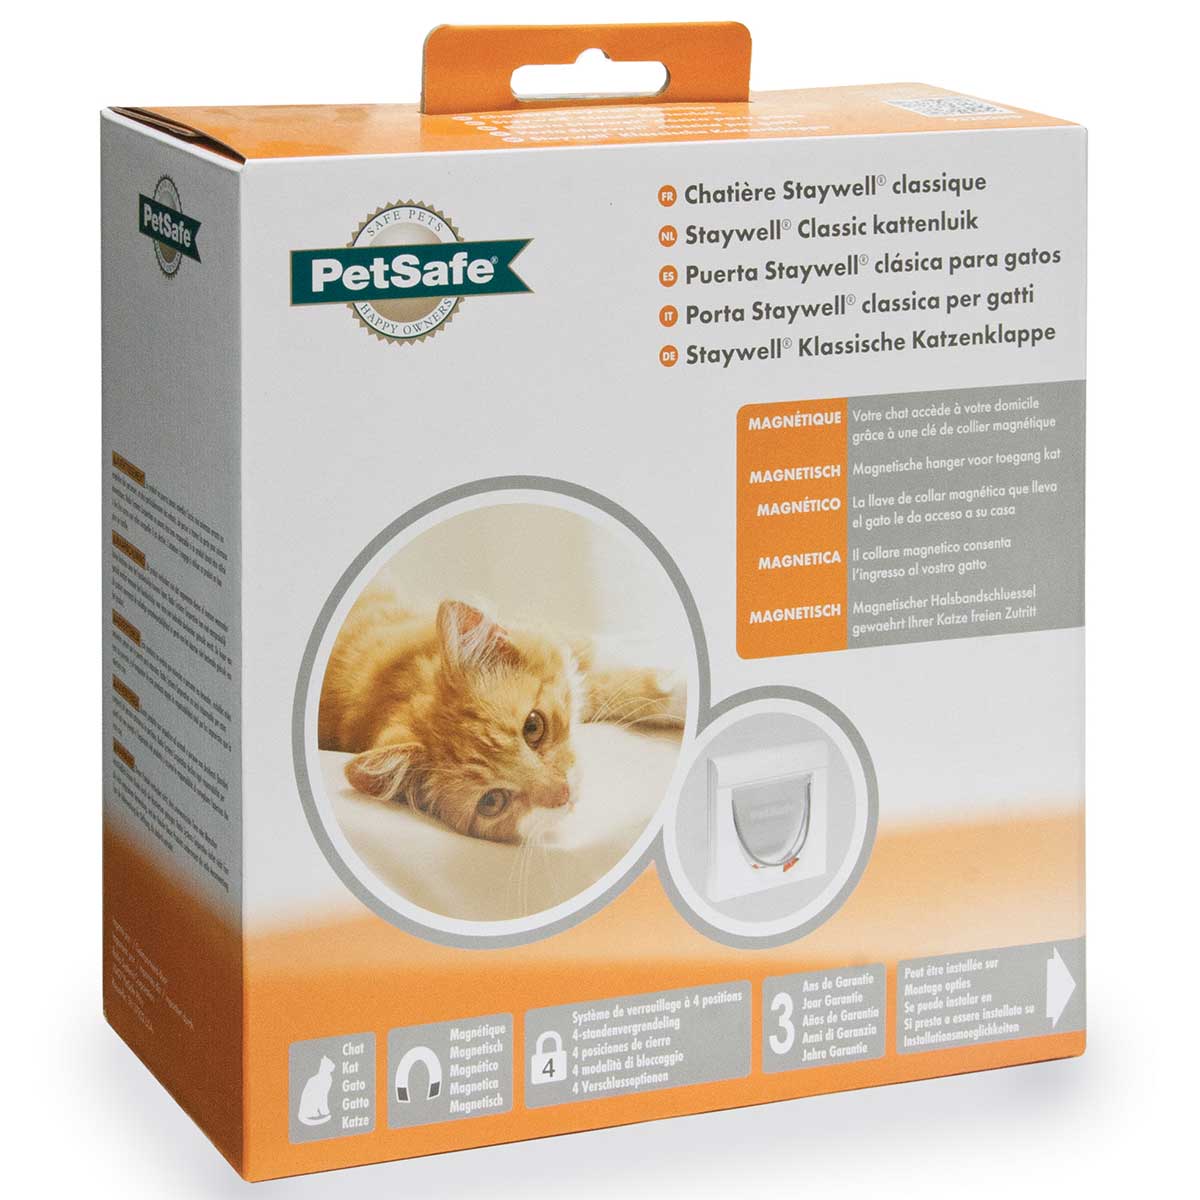 PetSafe chatière magnétique staywell 932